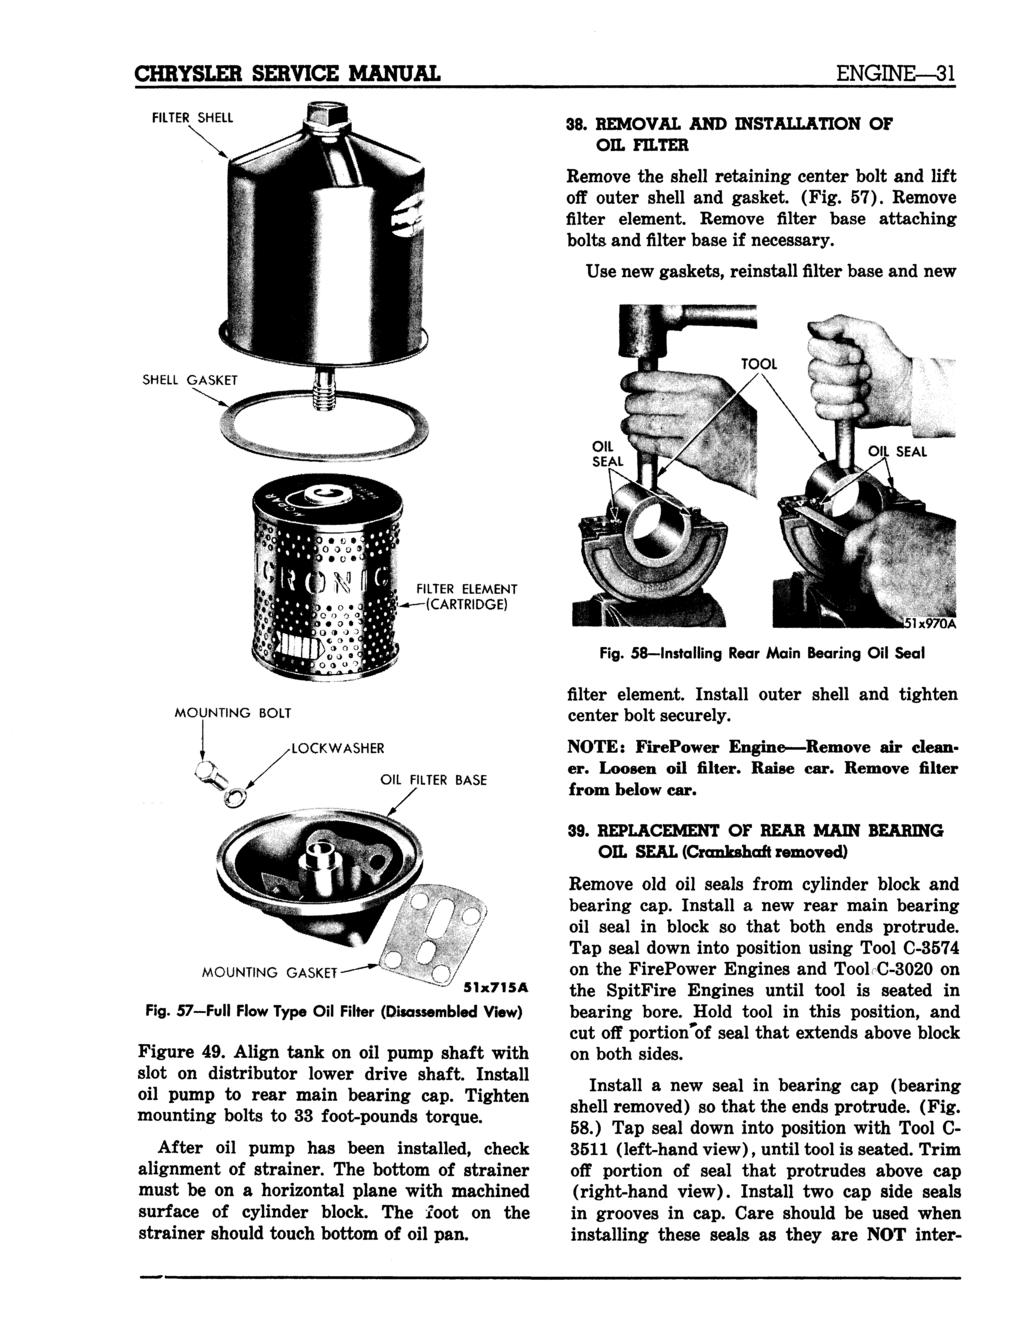 ENGINE 31 FILTER SHELL 38. REMOVAL AND INSTALLATION OF OIL FILTER Remove the shell retaining center bolt and lift off outer shell and gasket. (Fig. 57). Remove filter element.